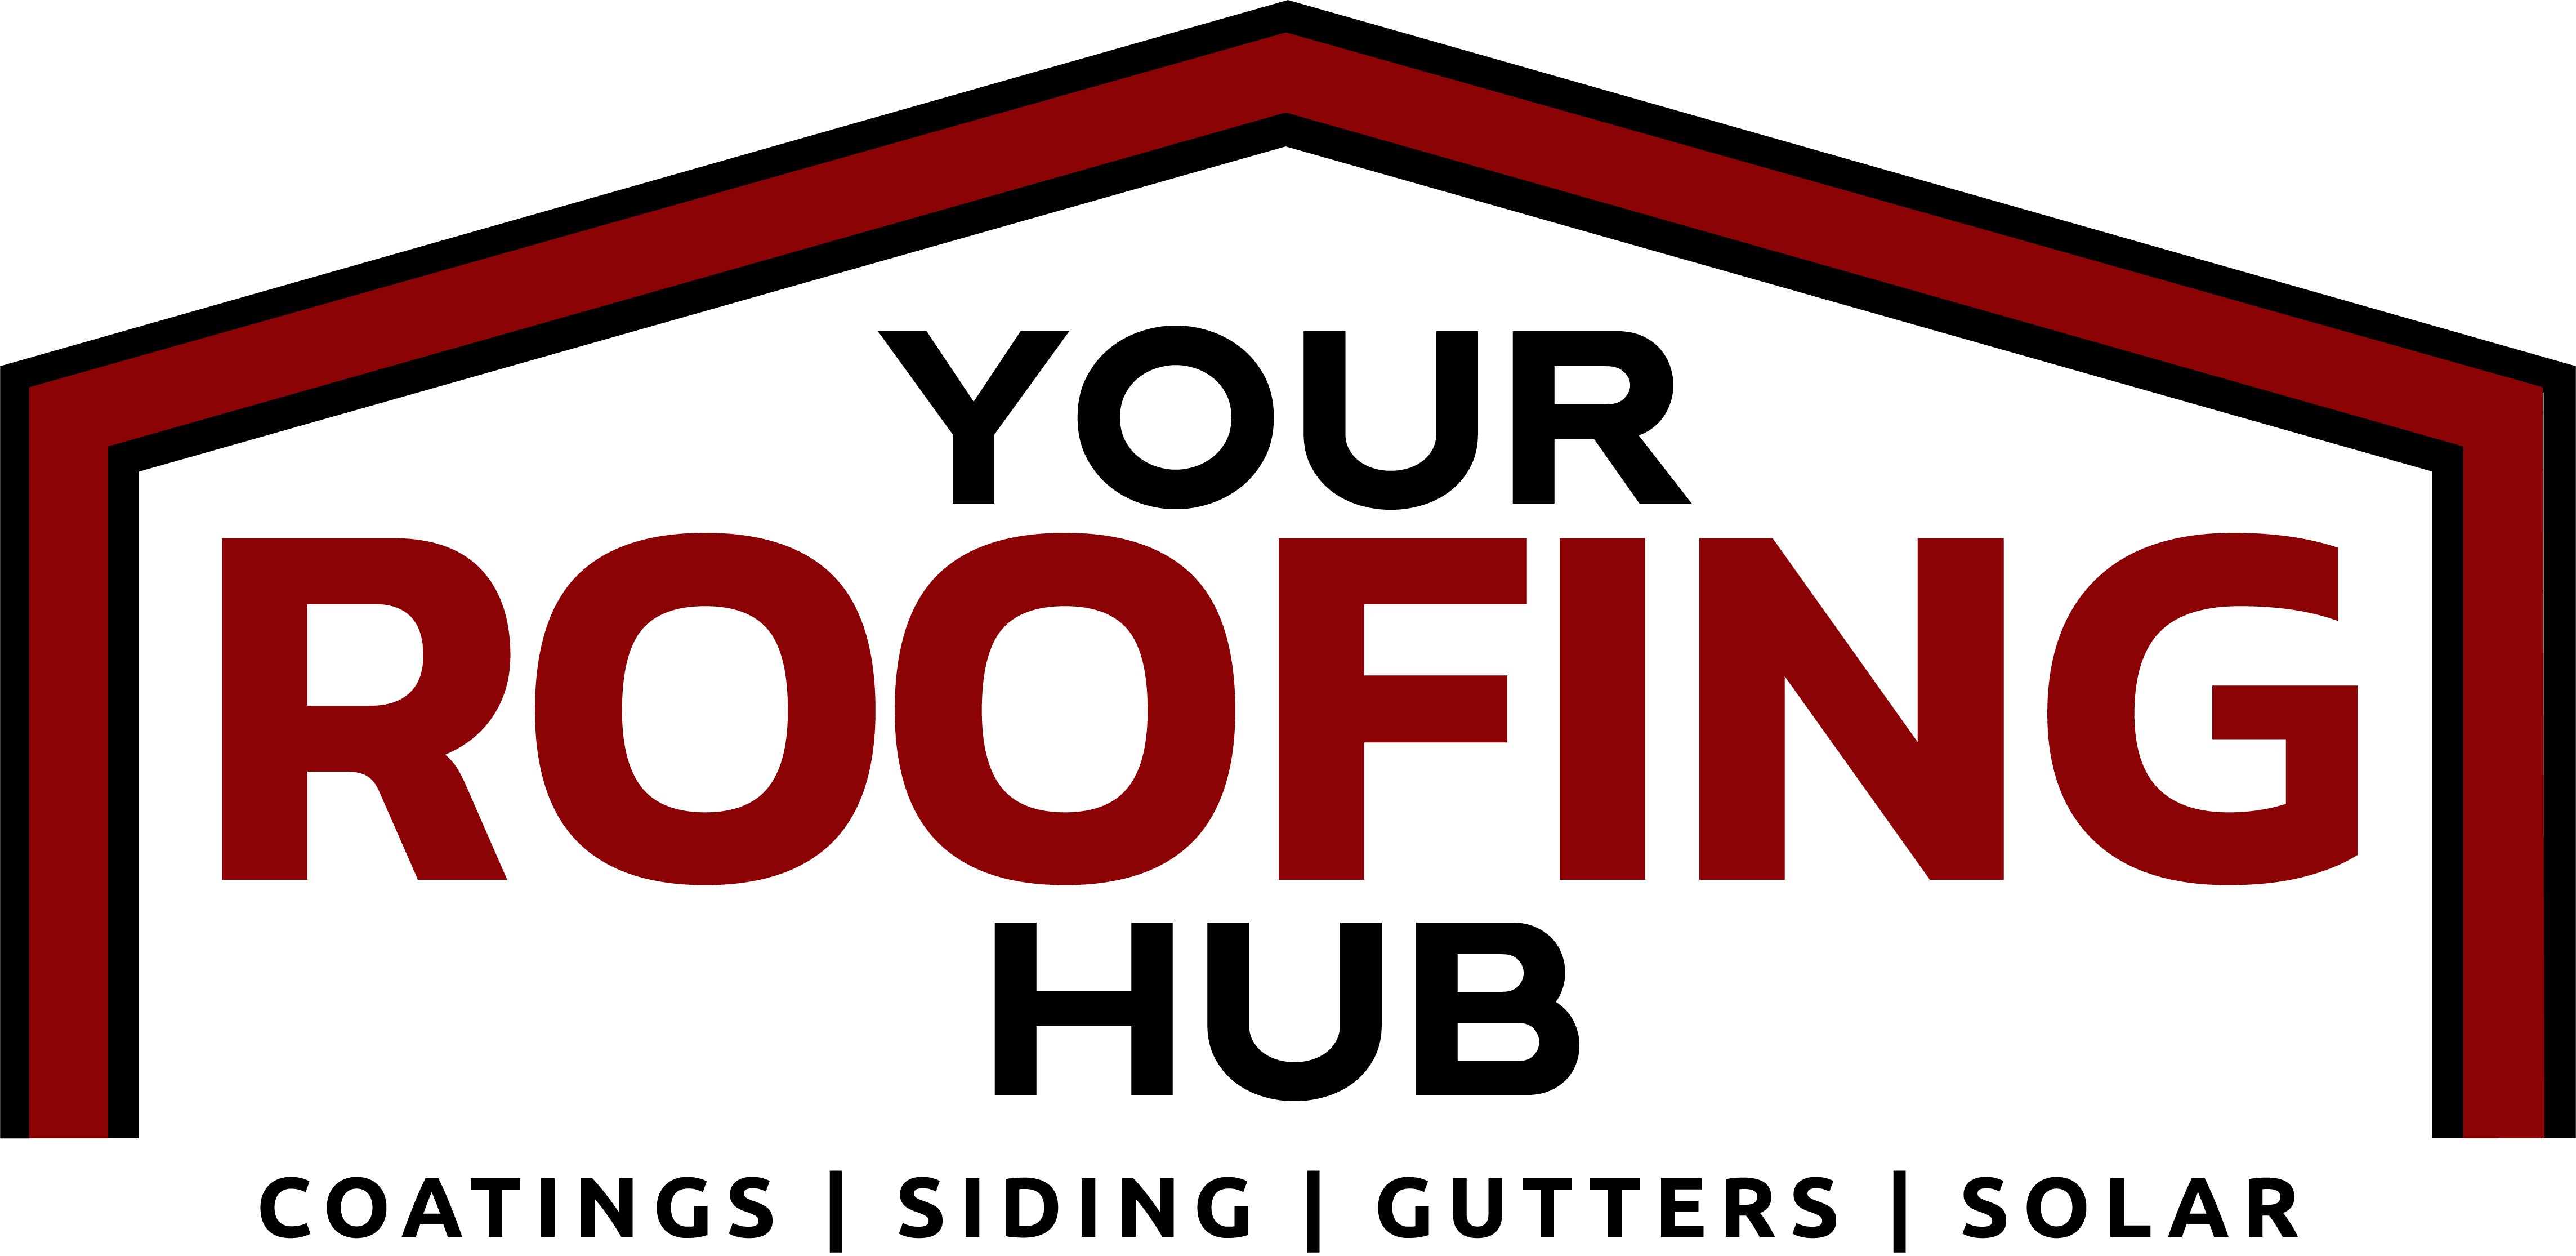 Your Roofing Hub, Inc. Logo